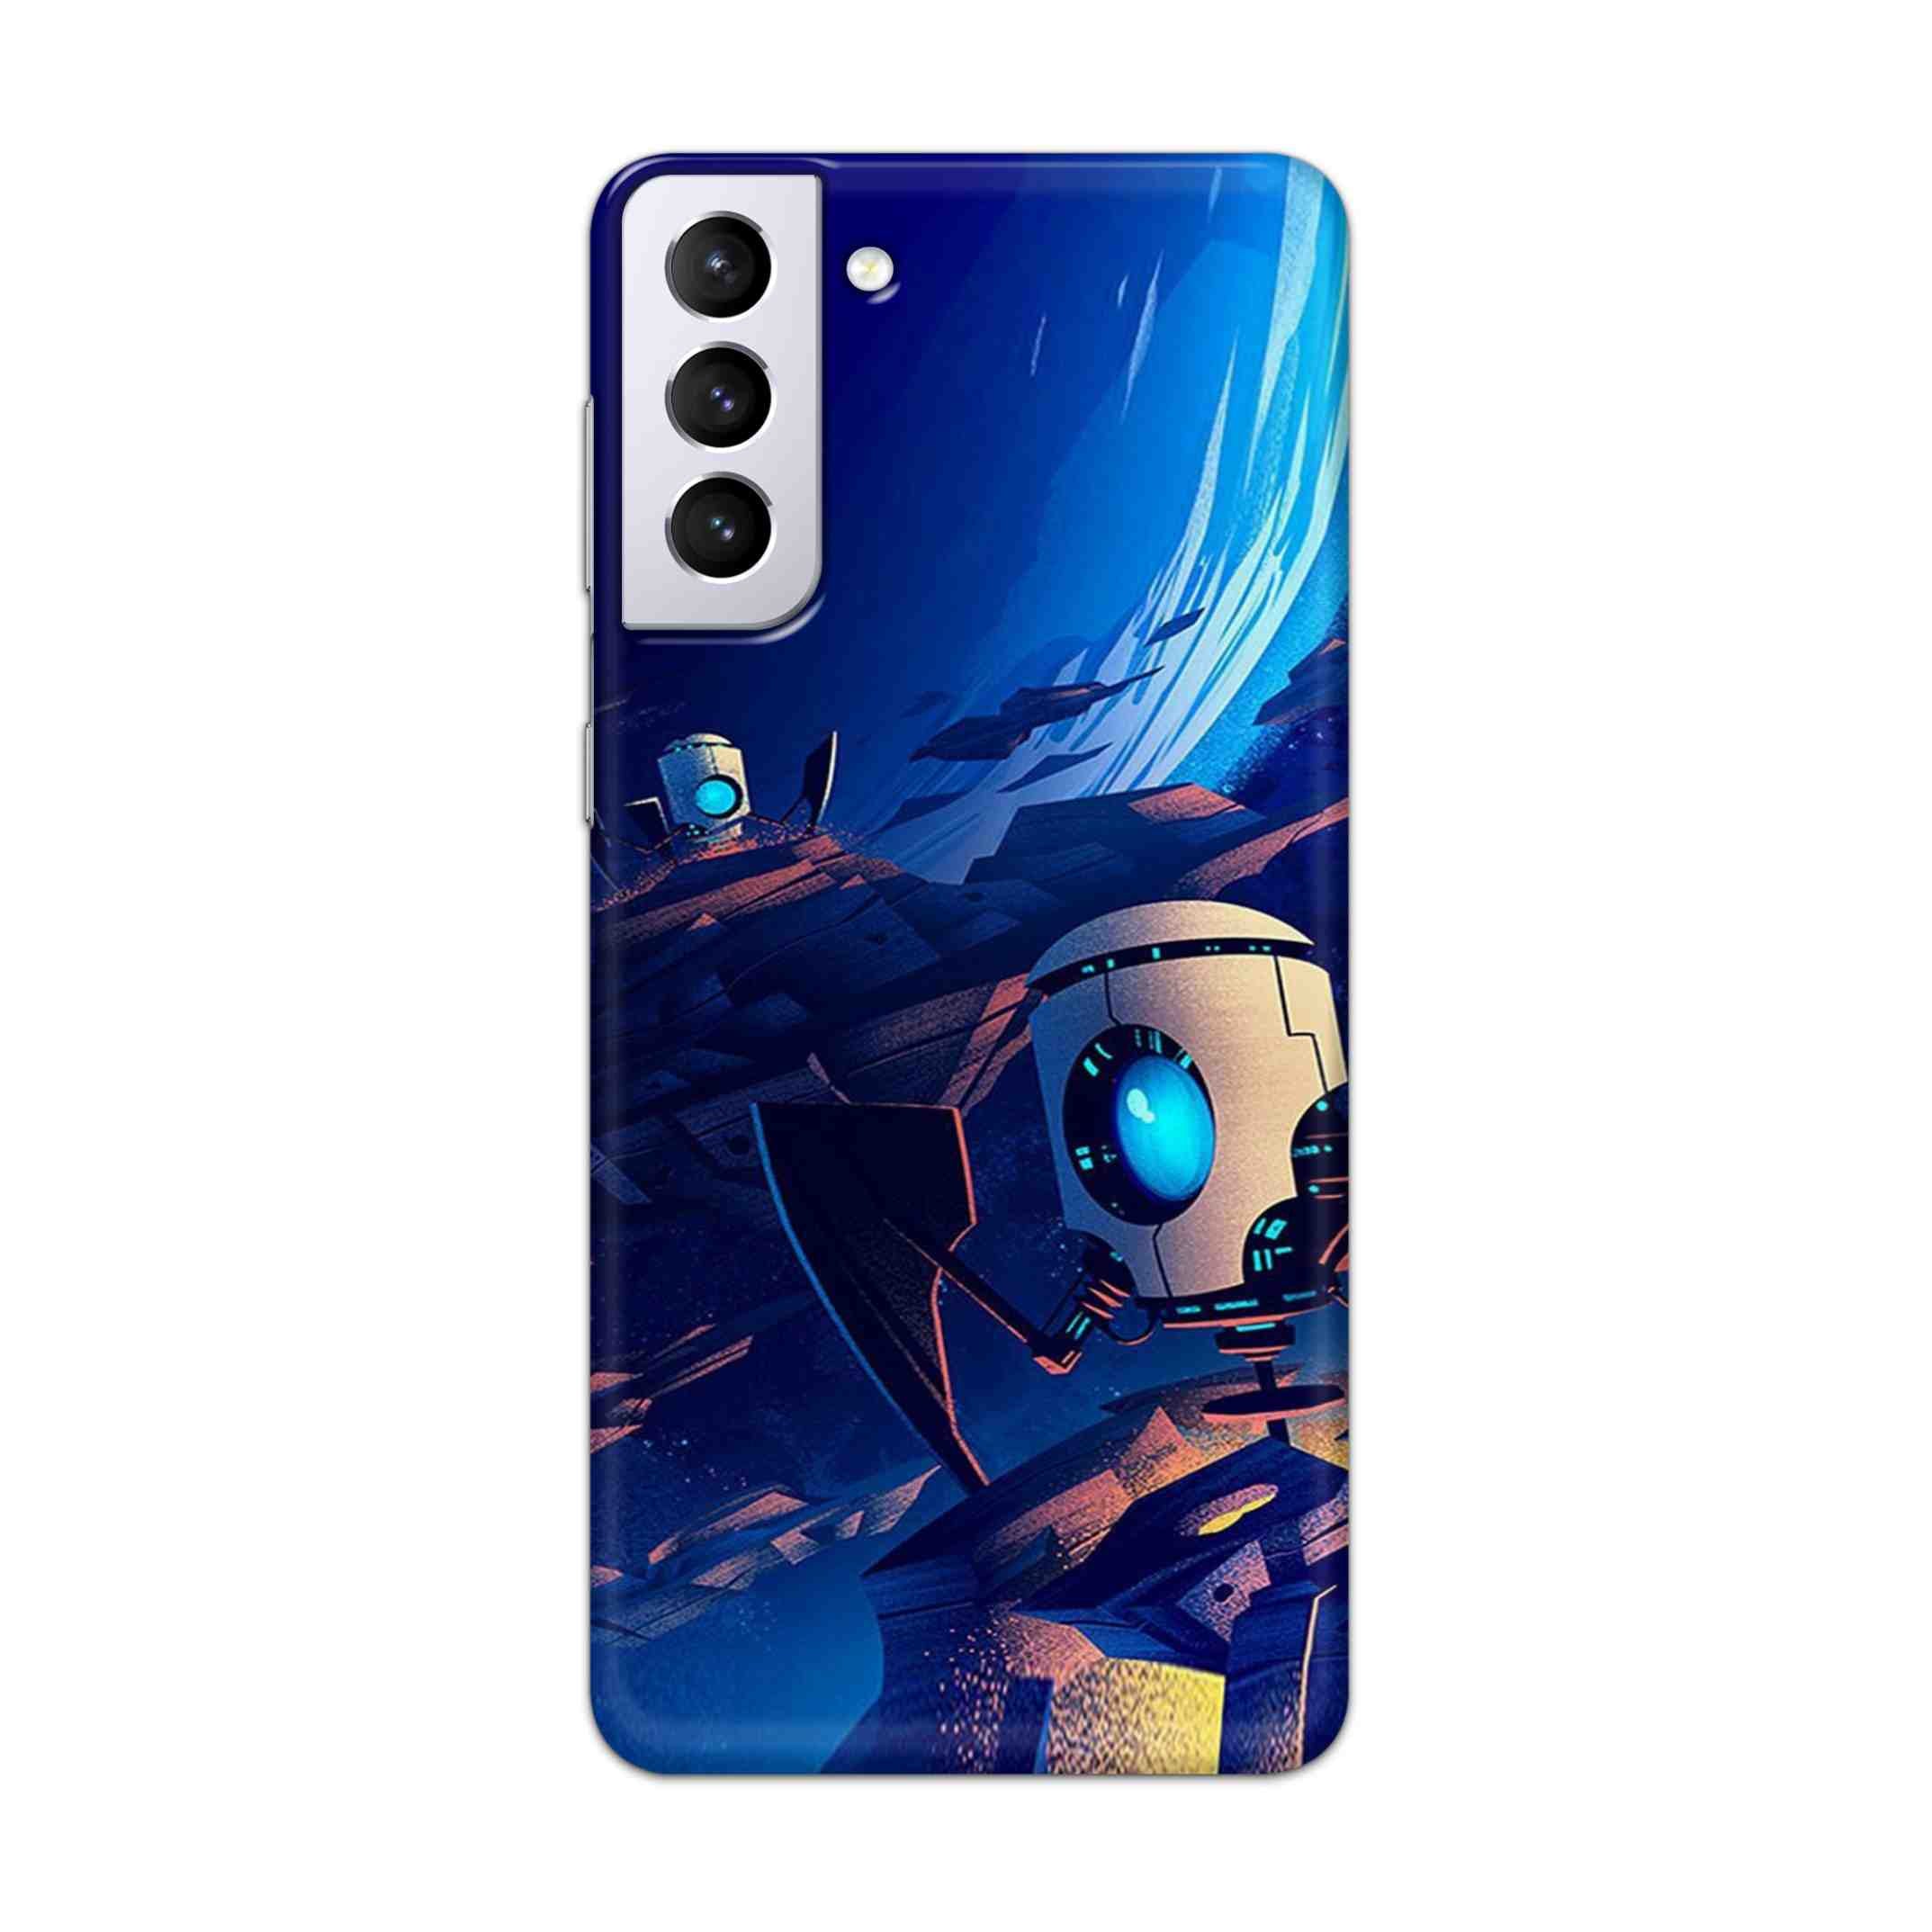 Buy Spaceship Robot Hard Back Mobile Phone Case Cover For Samsung Galaxy S21 Online